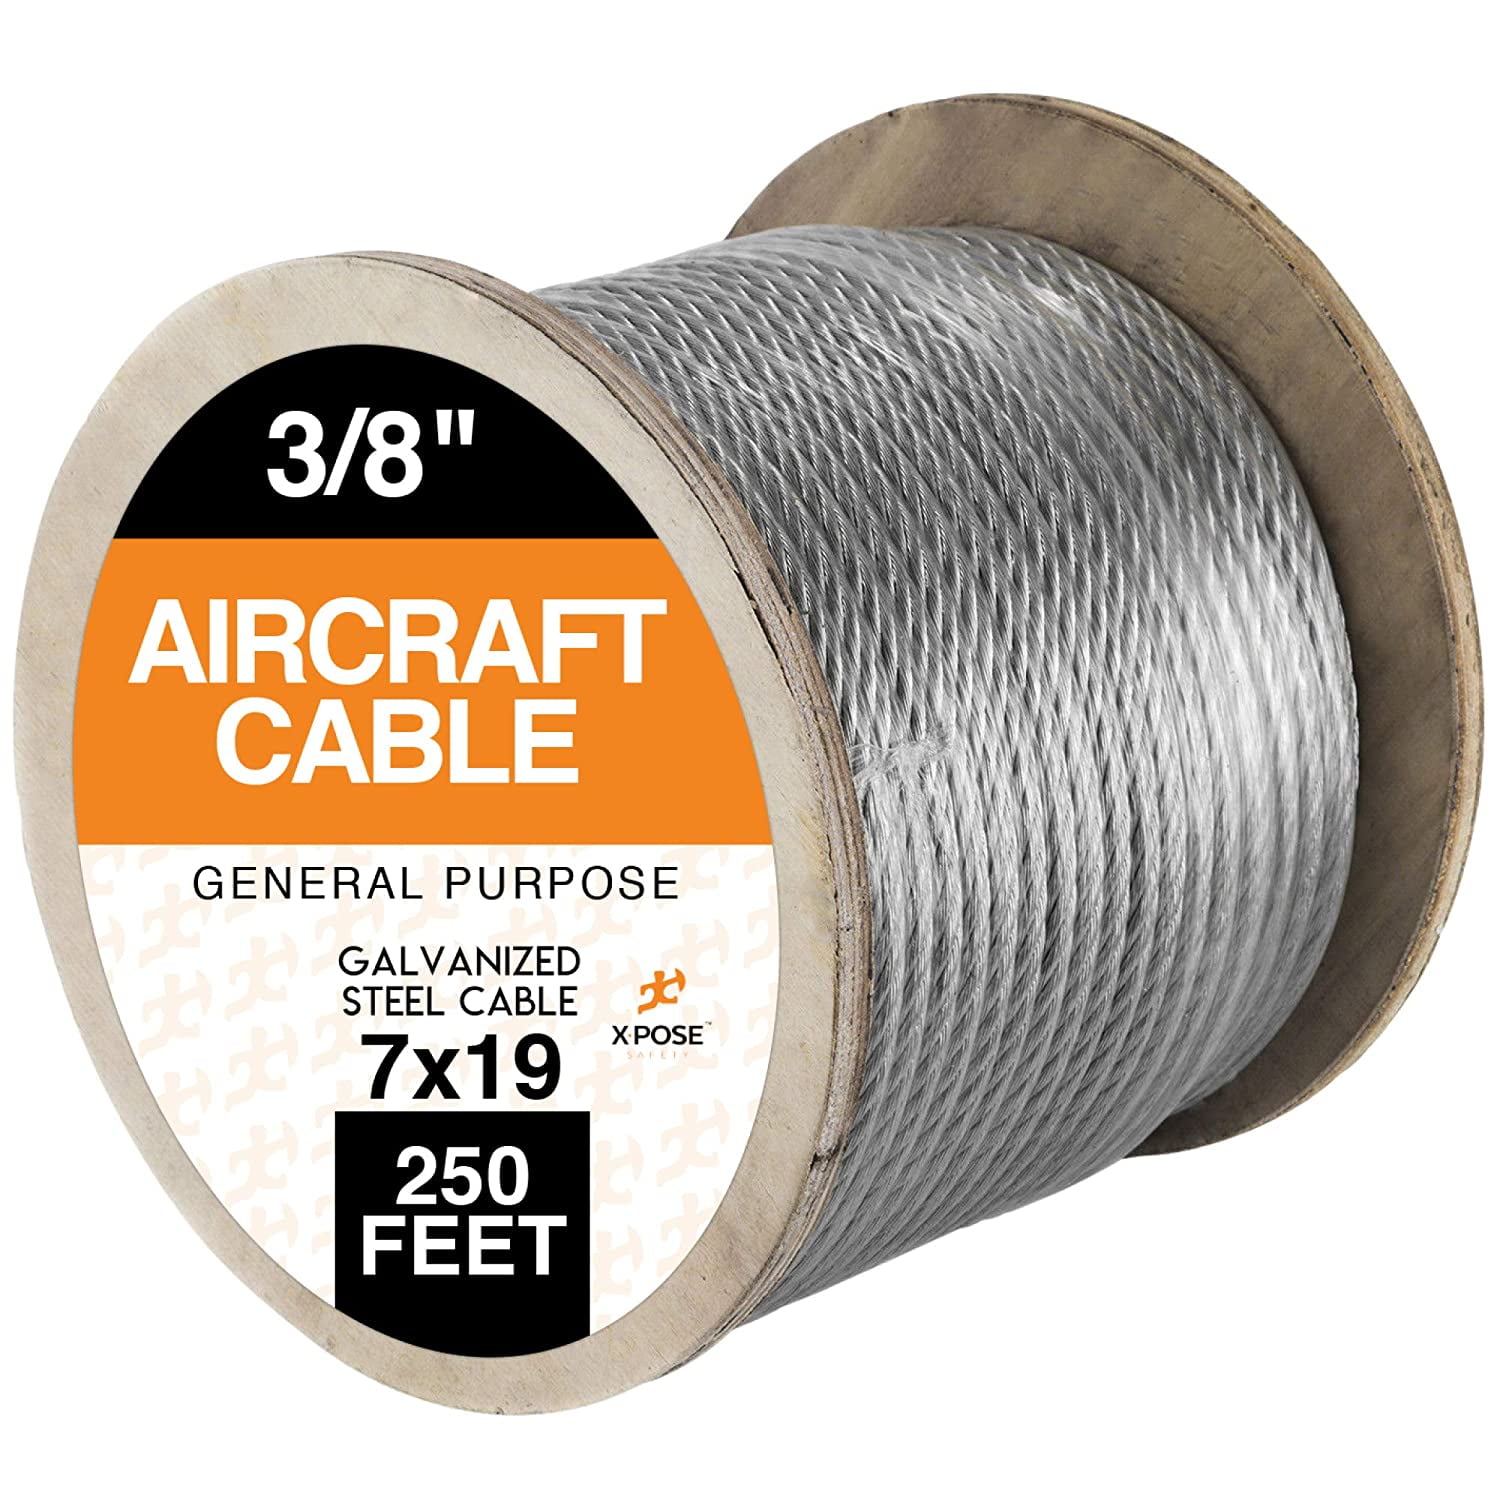 5/16" Galvanized Aircraft Cable Steel Wire Rope 7x19 600 Feet 